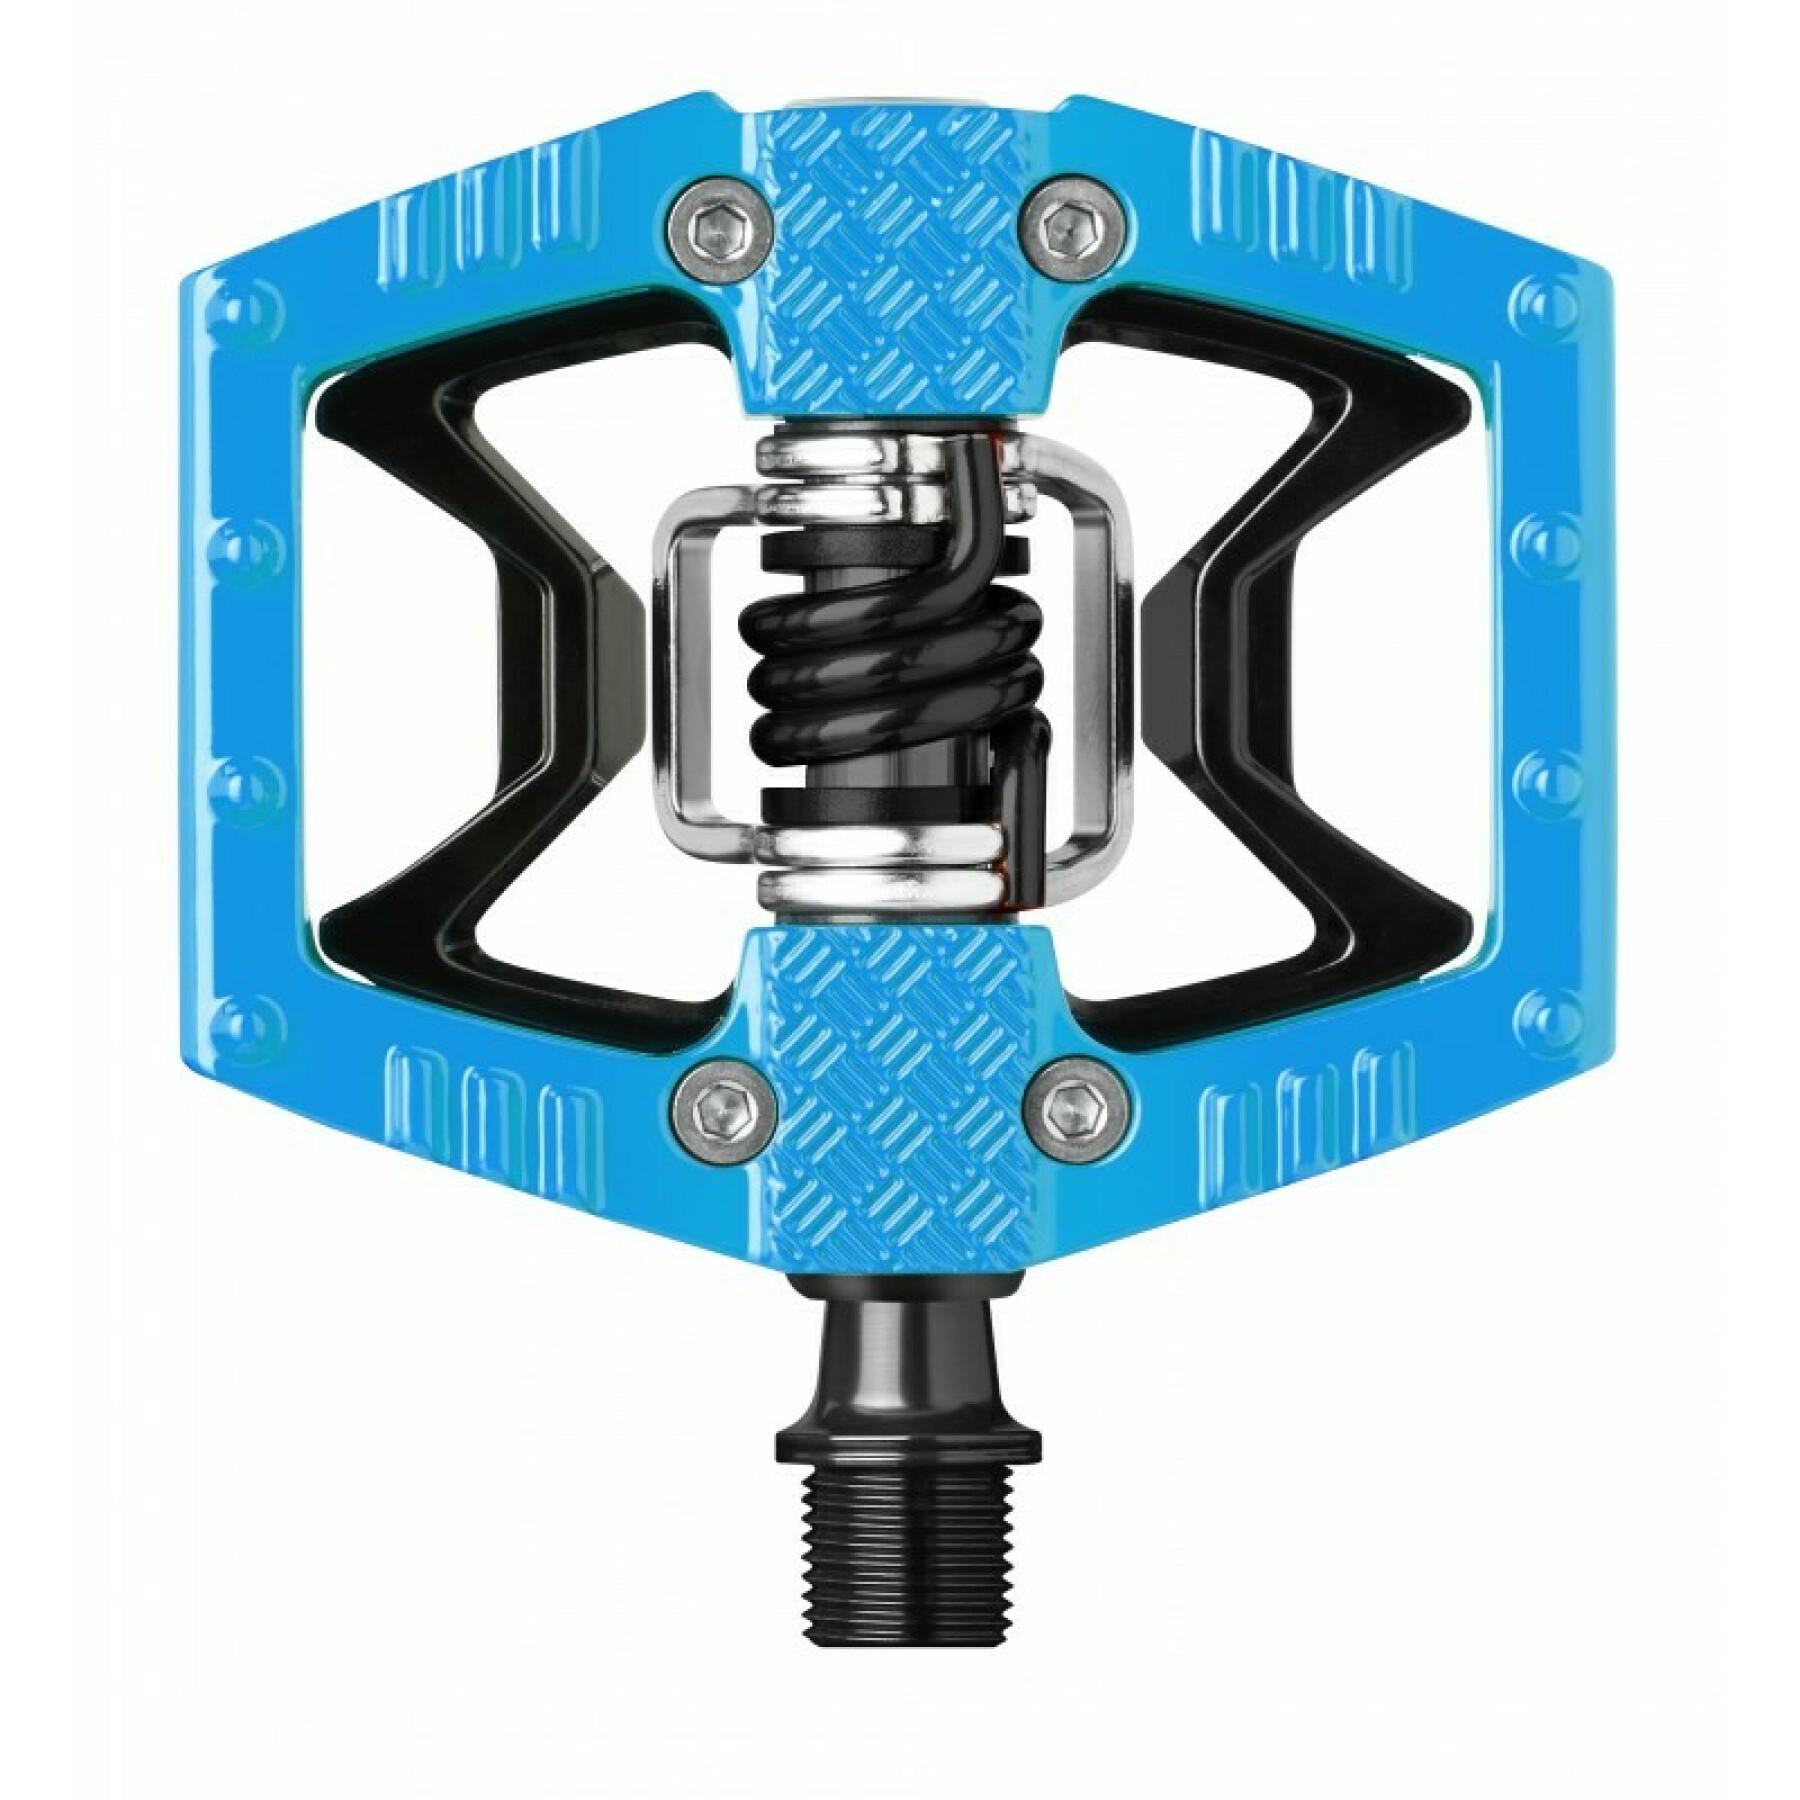 Double stroke pedals crankbrothers 2